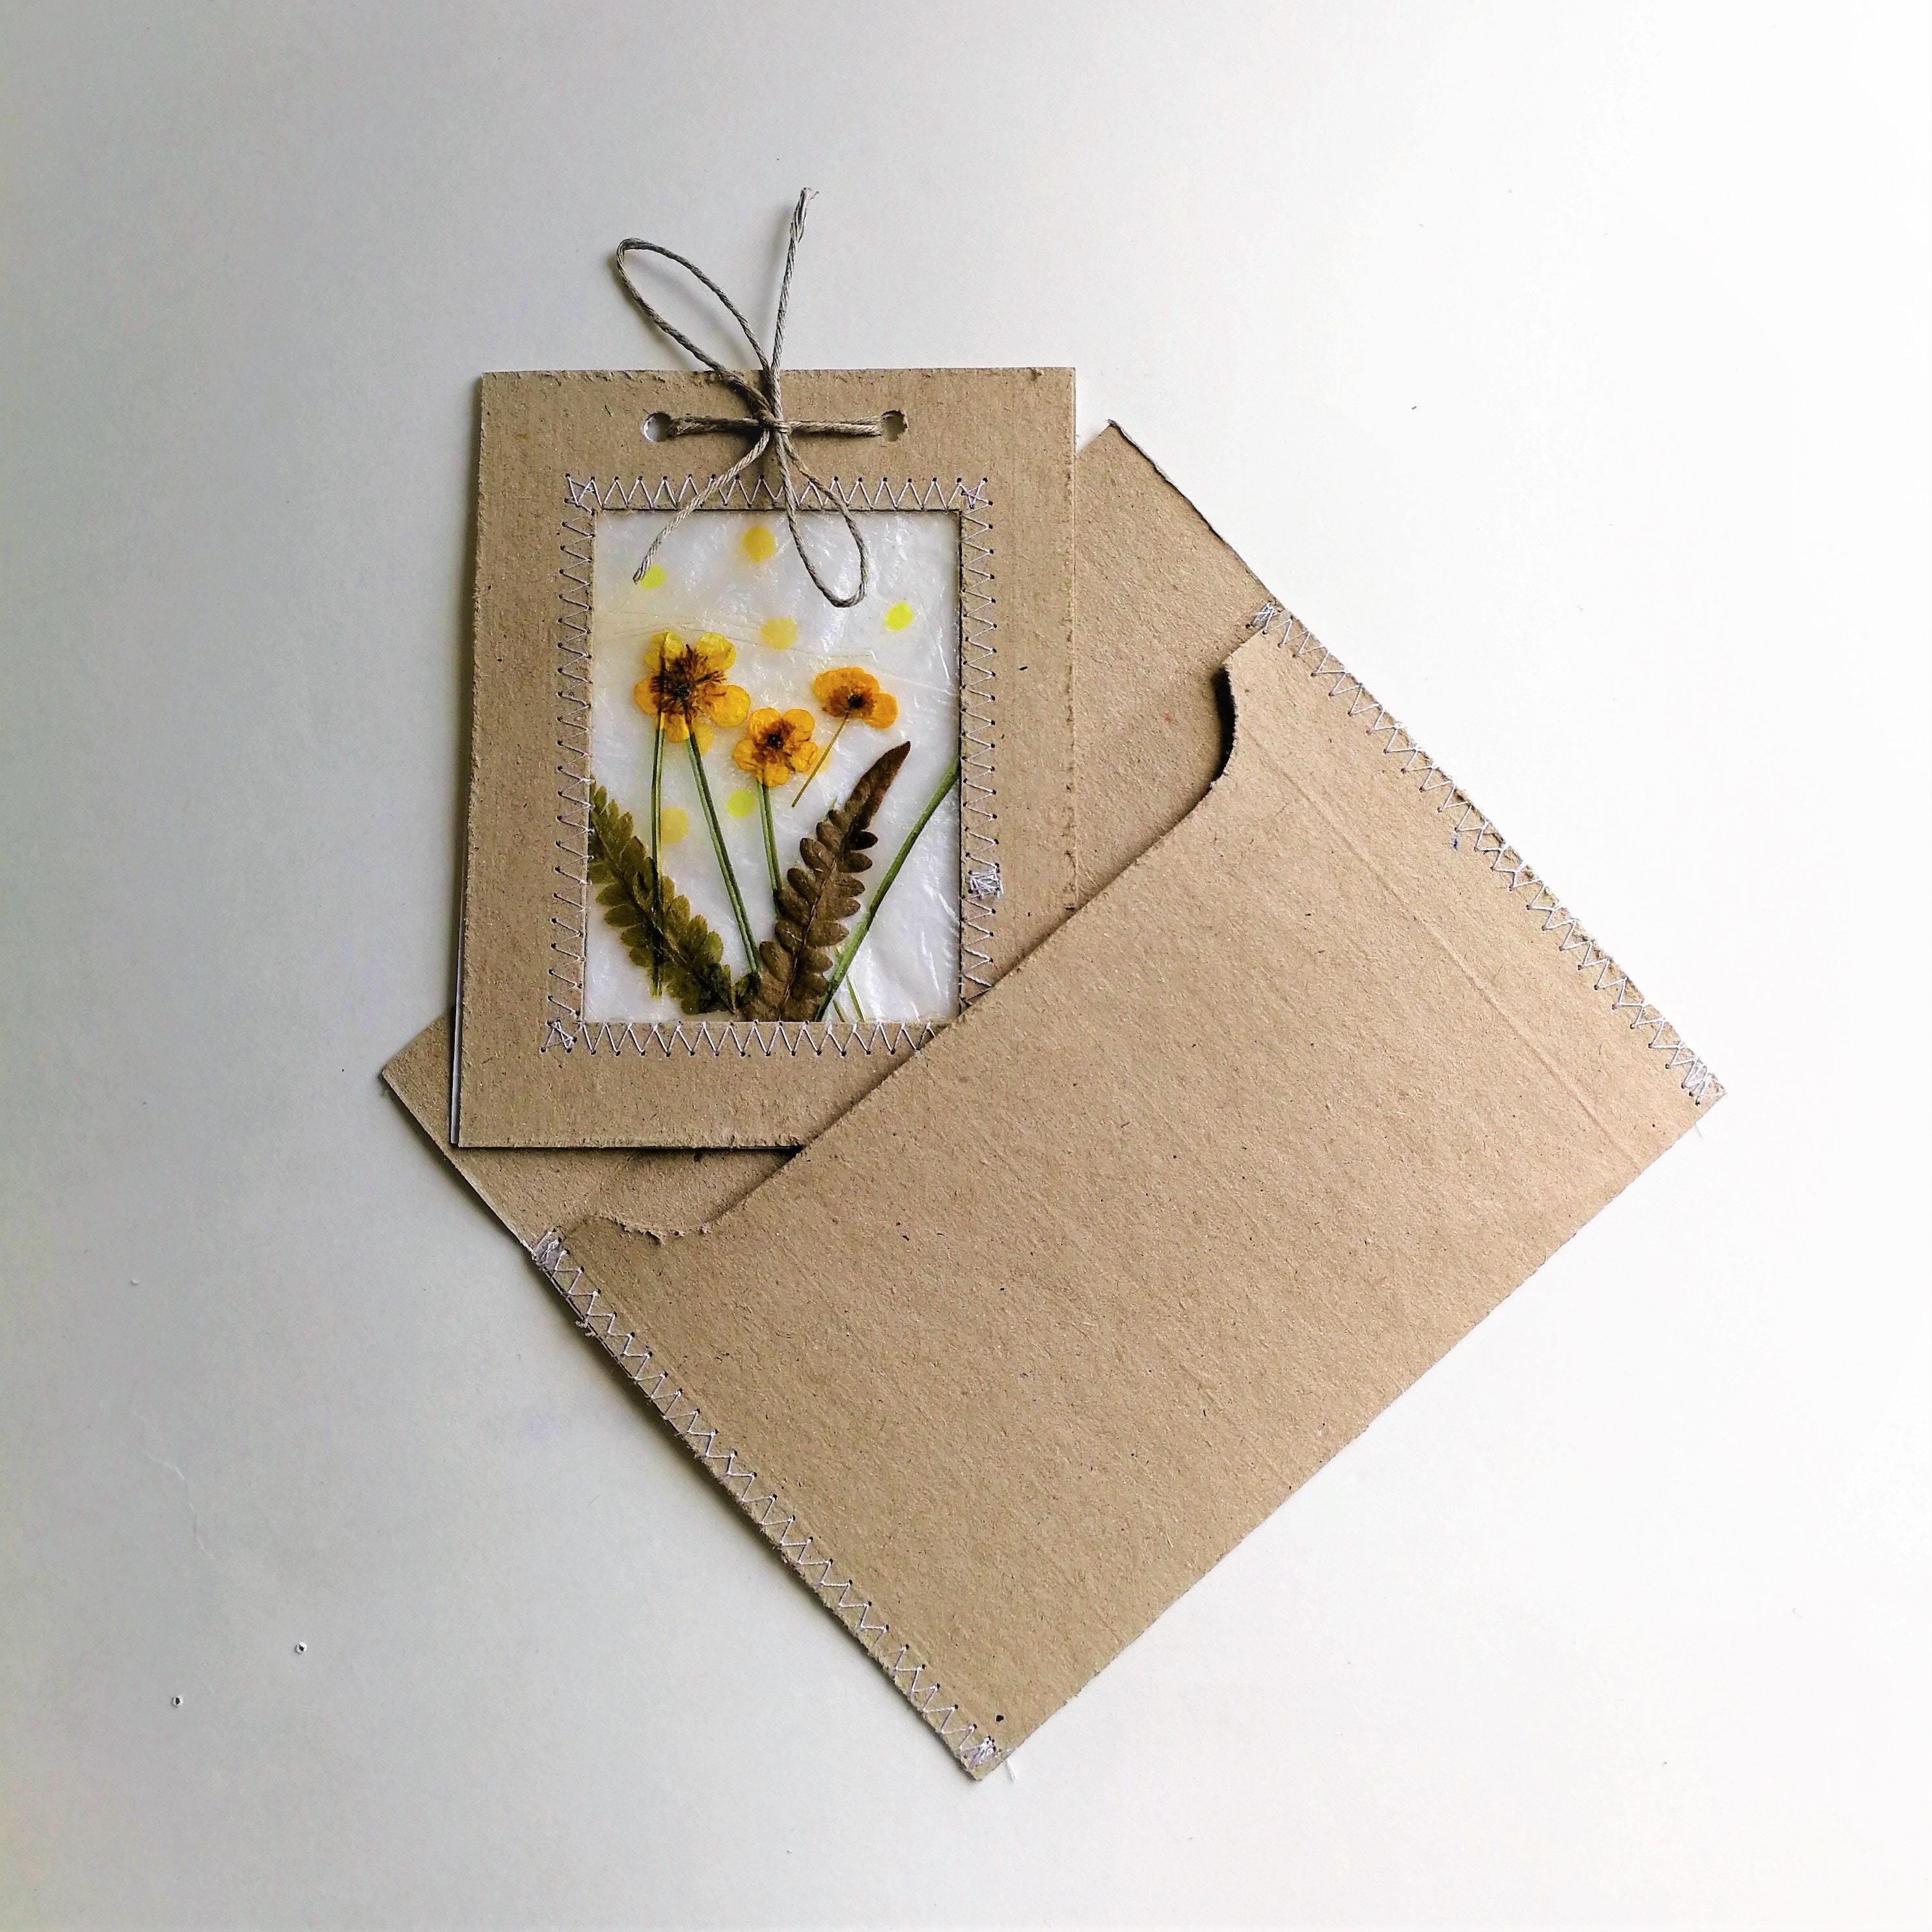 Craft Knife: Decoupaged Pressed Flower Greeting Cards, and a Real